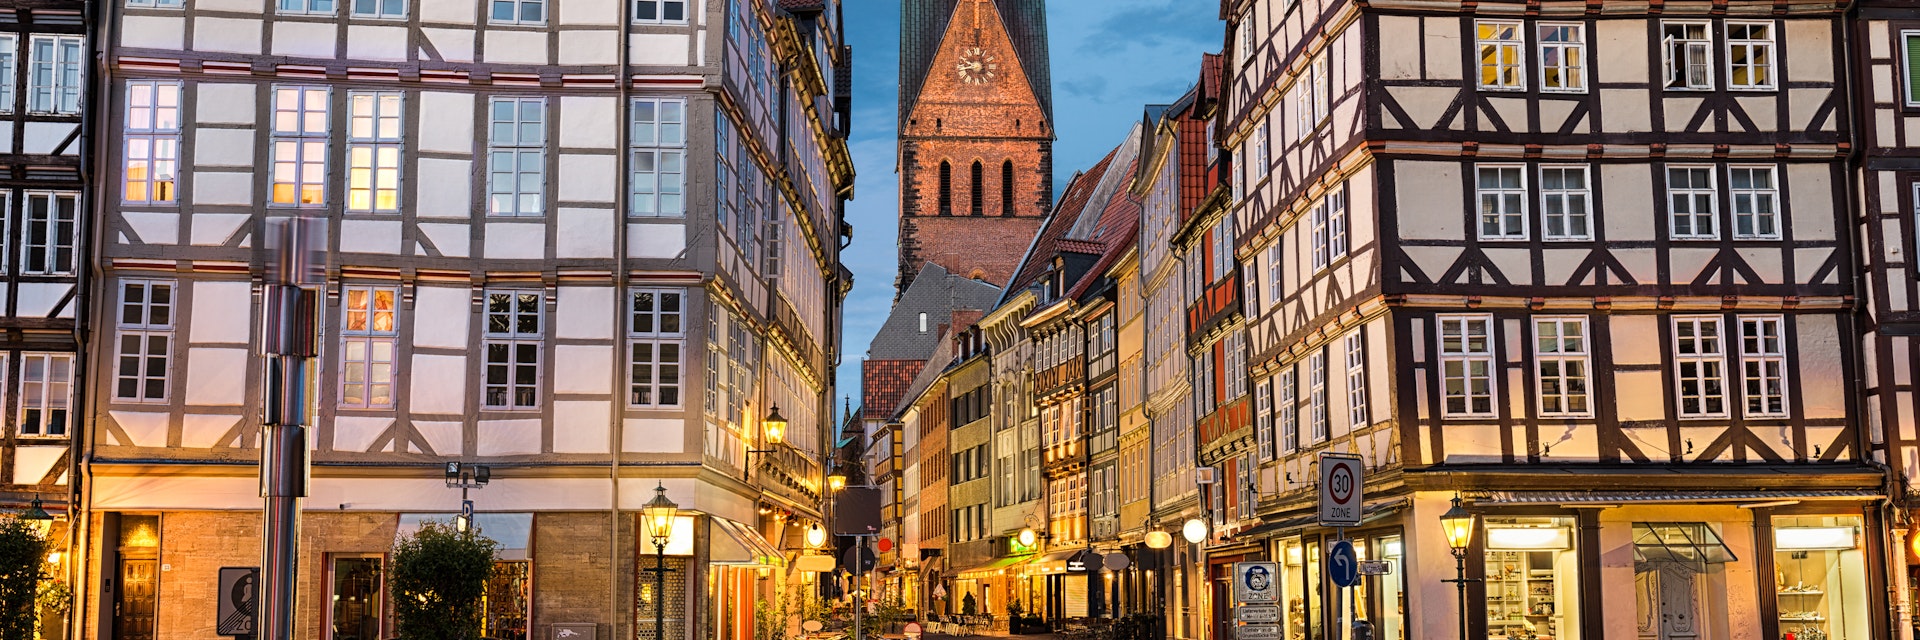 Marktkirche and old town in Hannover, Germany